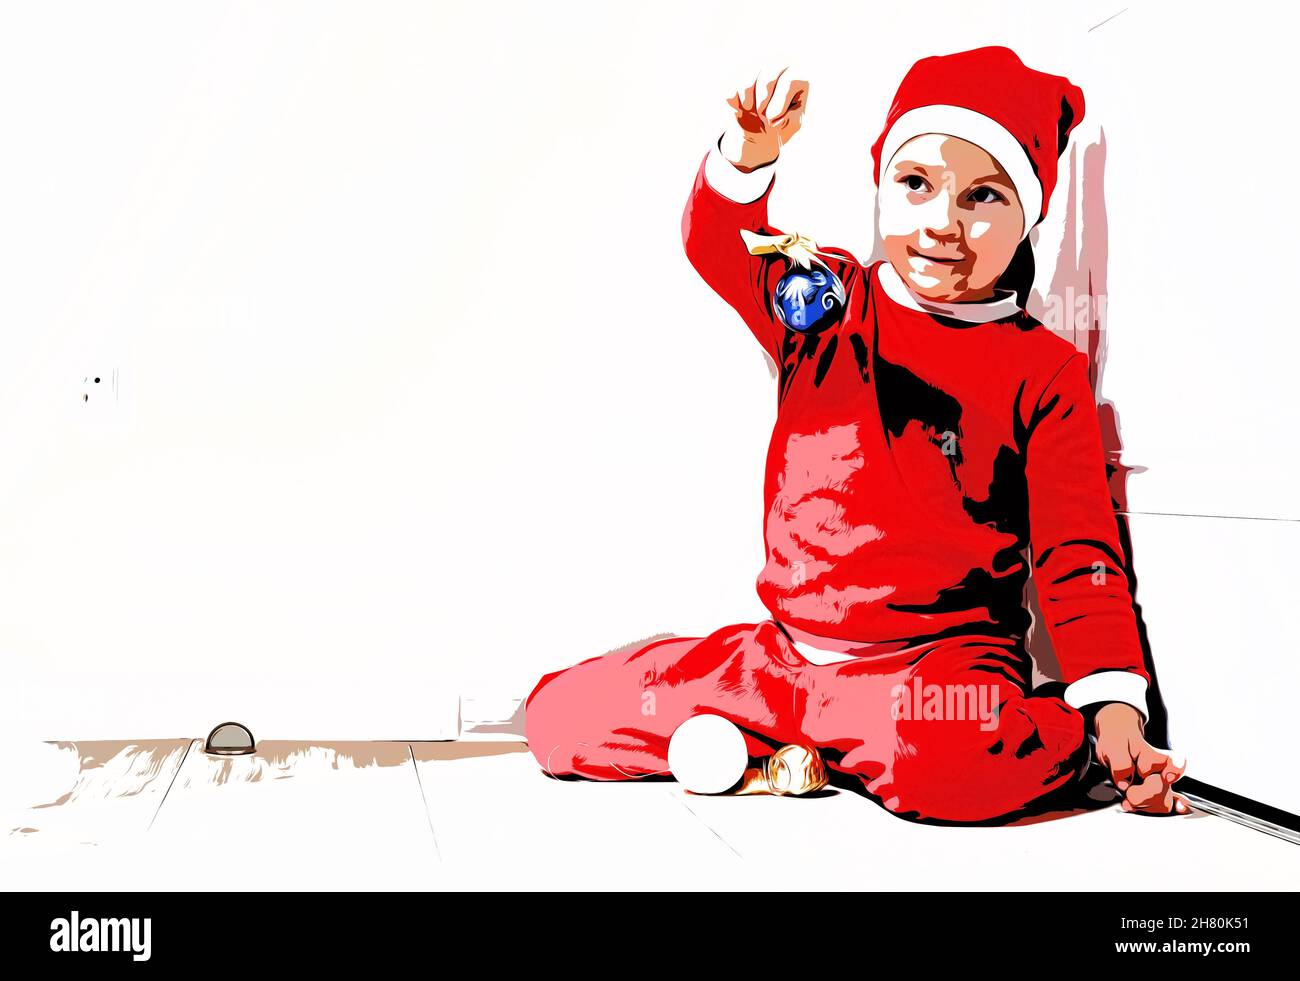 Illustration. Little boy in the form of a Santa Claus smiling, standing on a white background Stock Photo